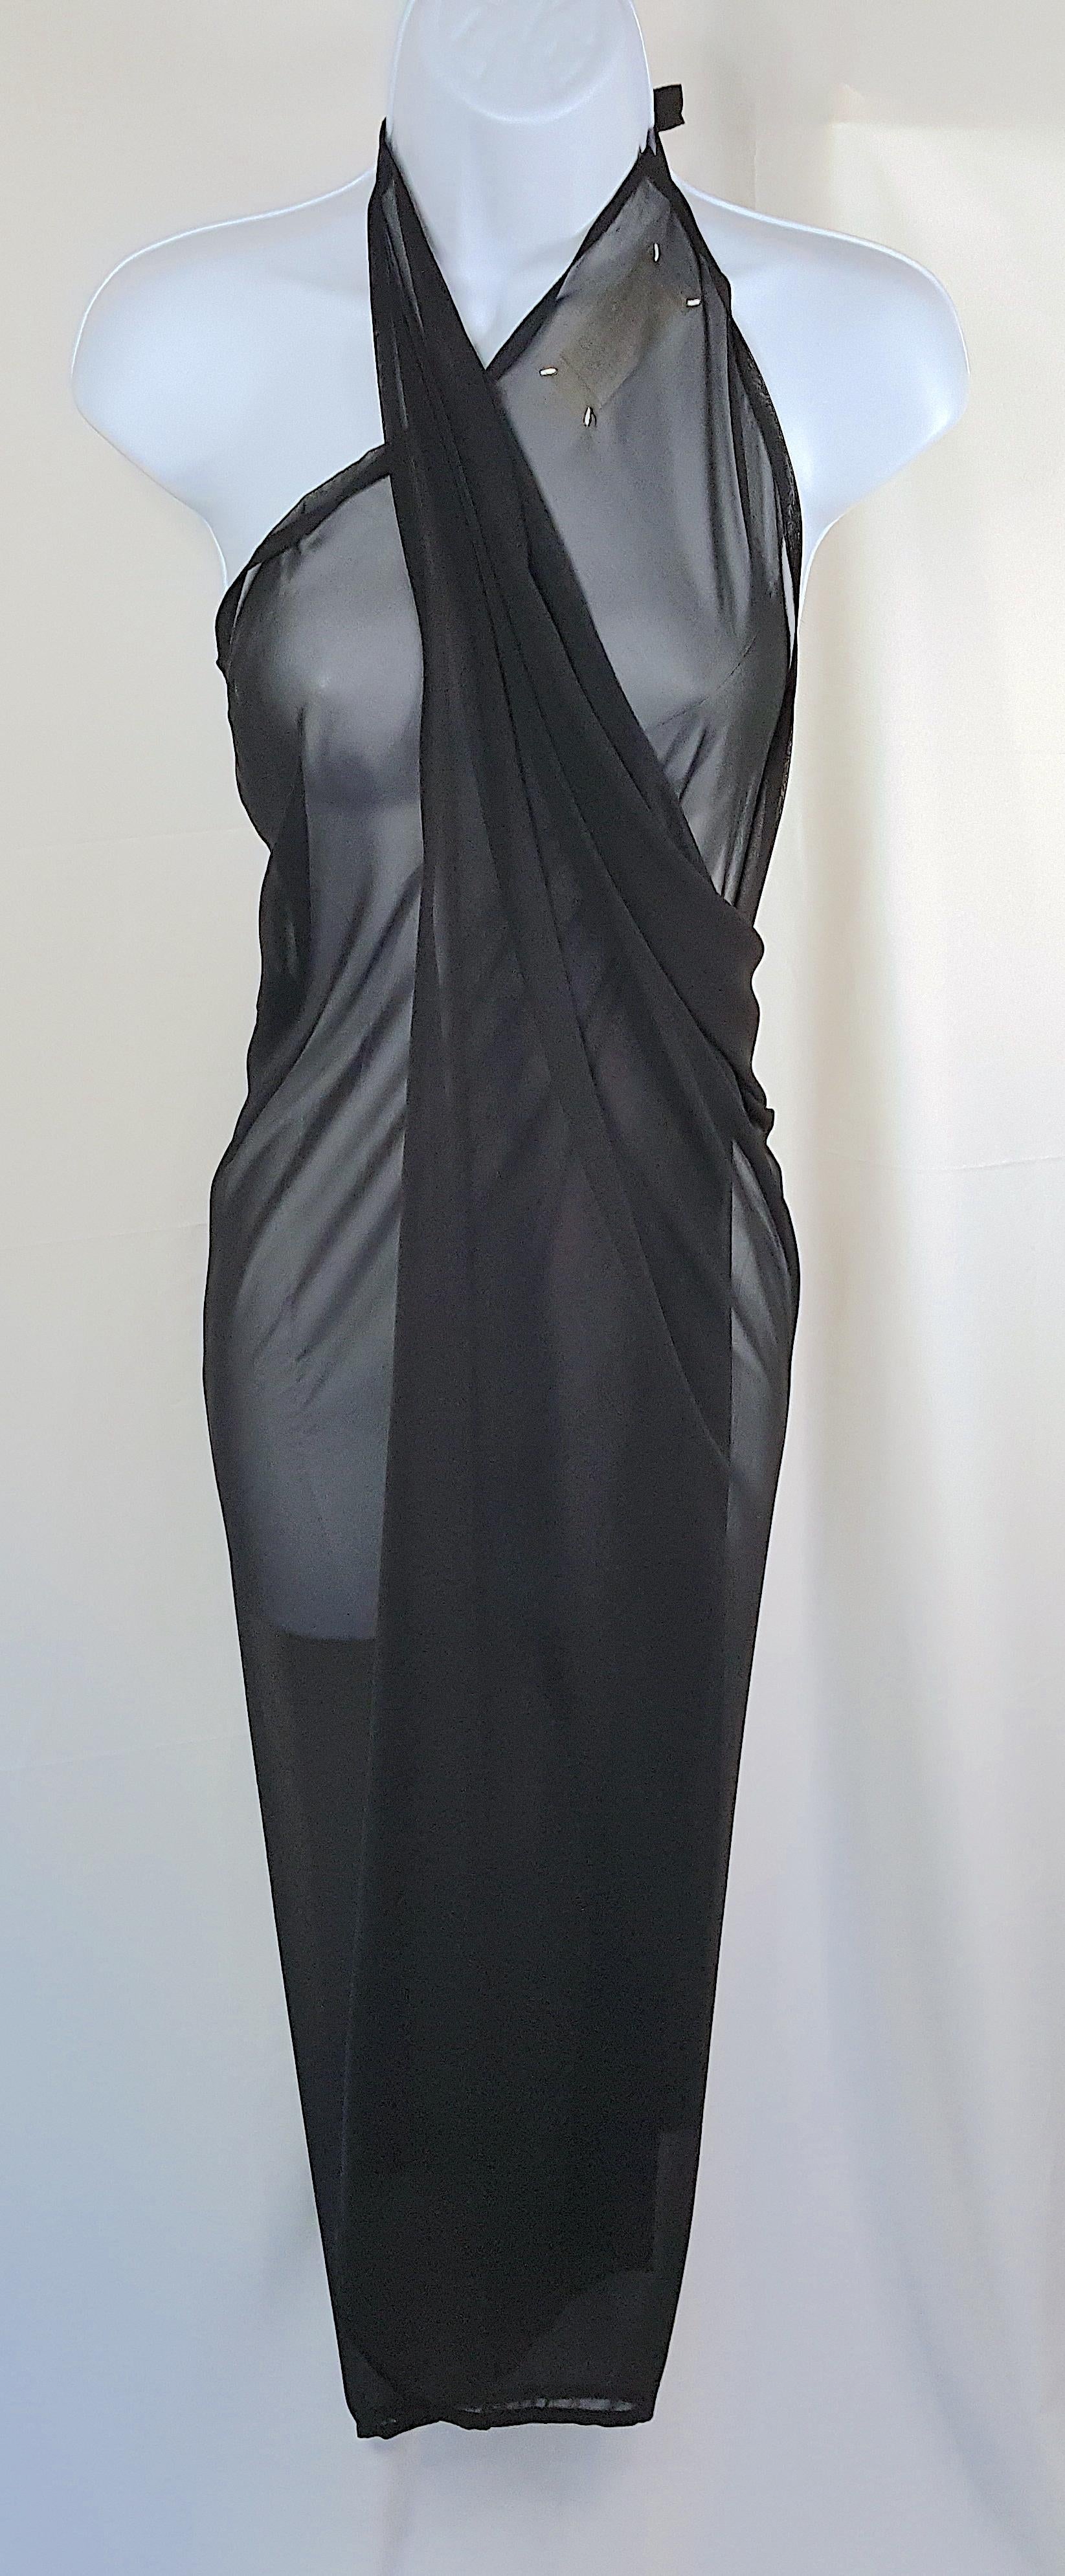 MartinMargiela 1990 1stRetrospectiveCollection1994 Sheer Black Convertible Apron In Good Condition For Sale In Chicago, IL